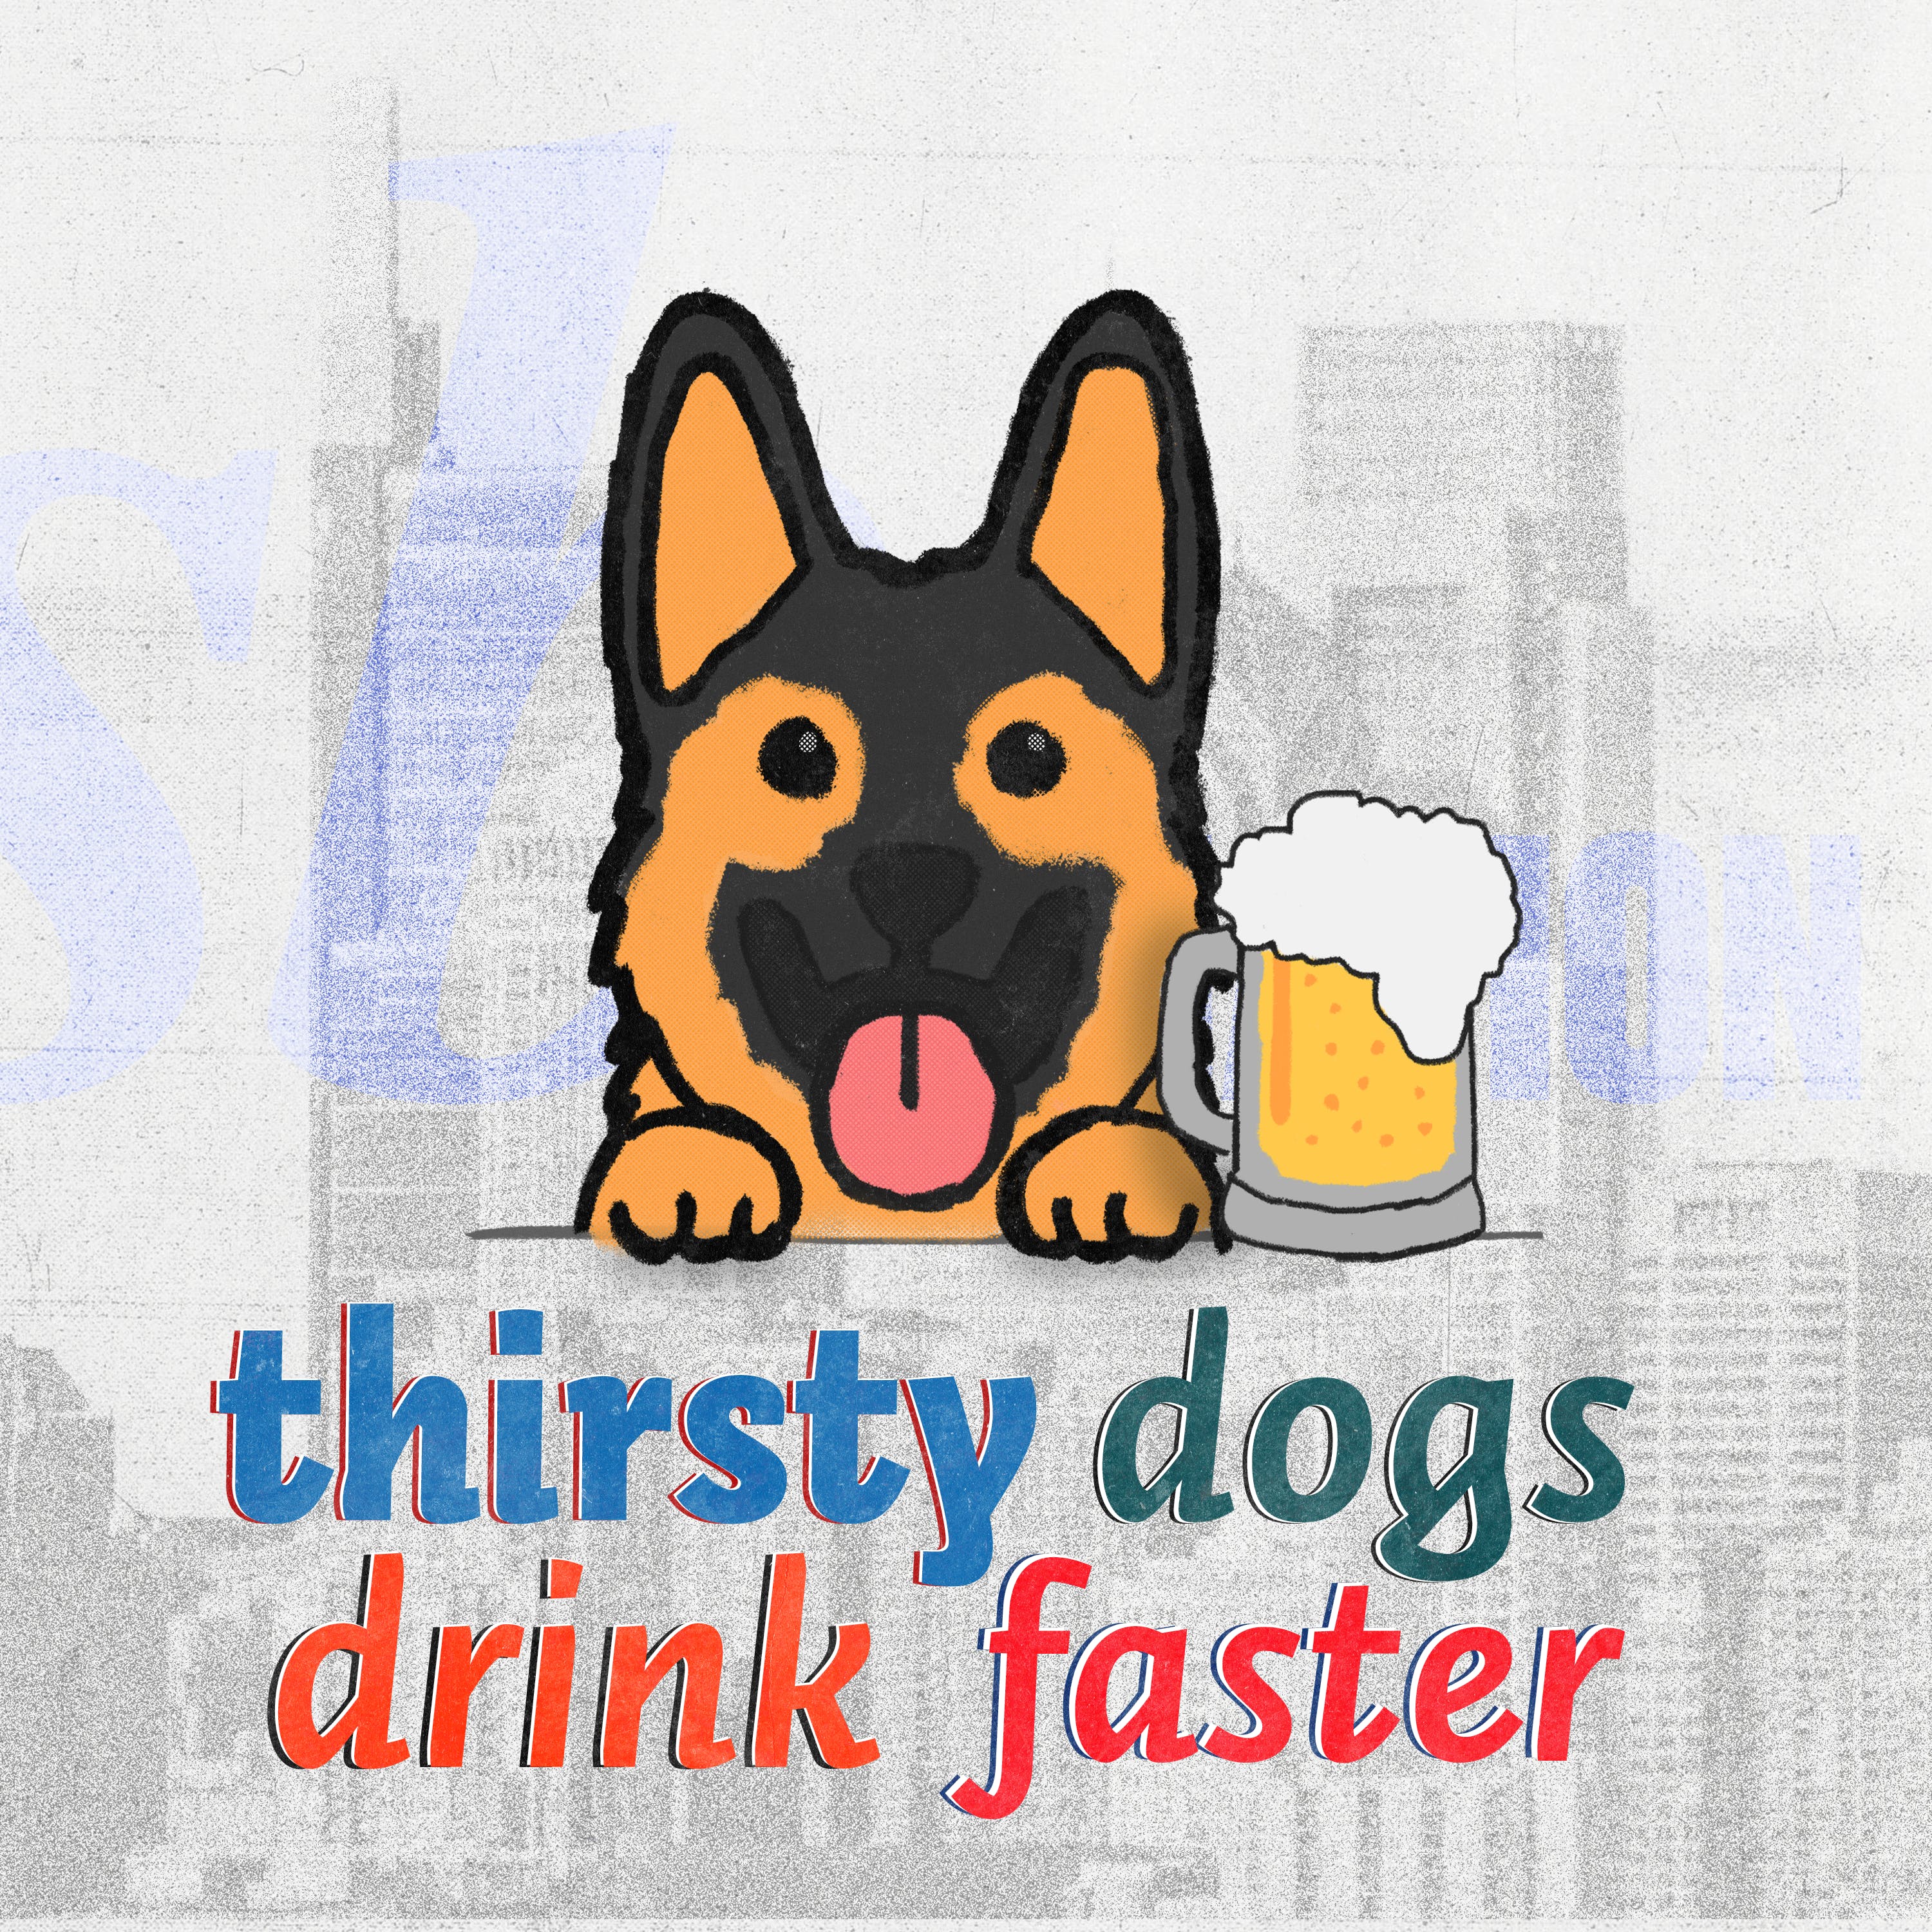 Thirsty Dogs Drink Faster: The Eagles' undefeated streak ends, Joel Embiid is back to his dominant self and everything else from the Philadelphia sports scene. With Paul Hudrick and Shamus Clancy.